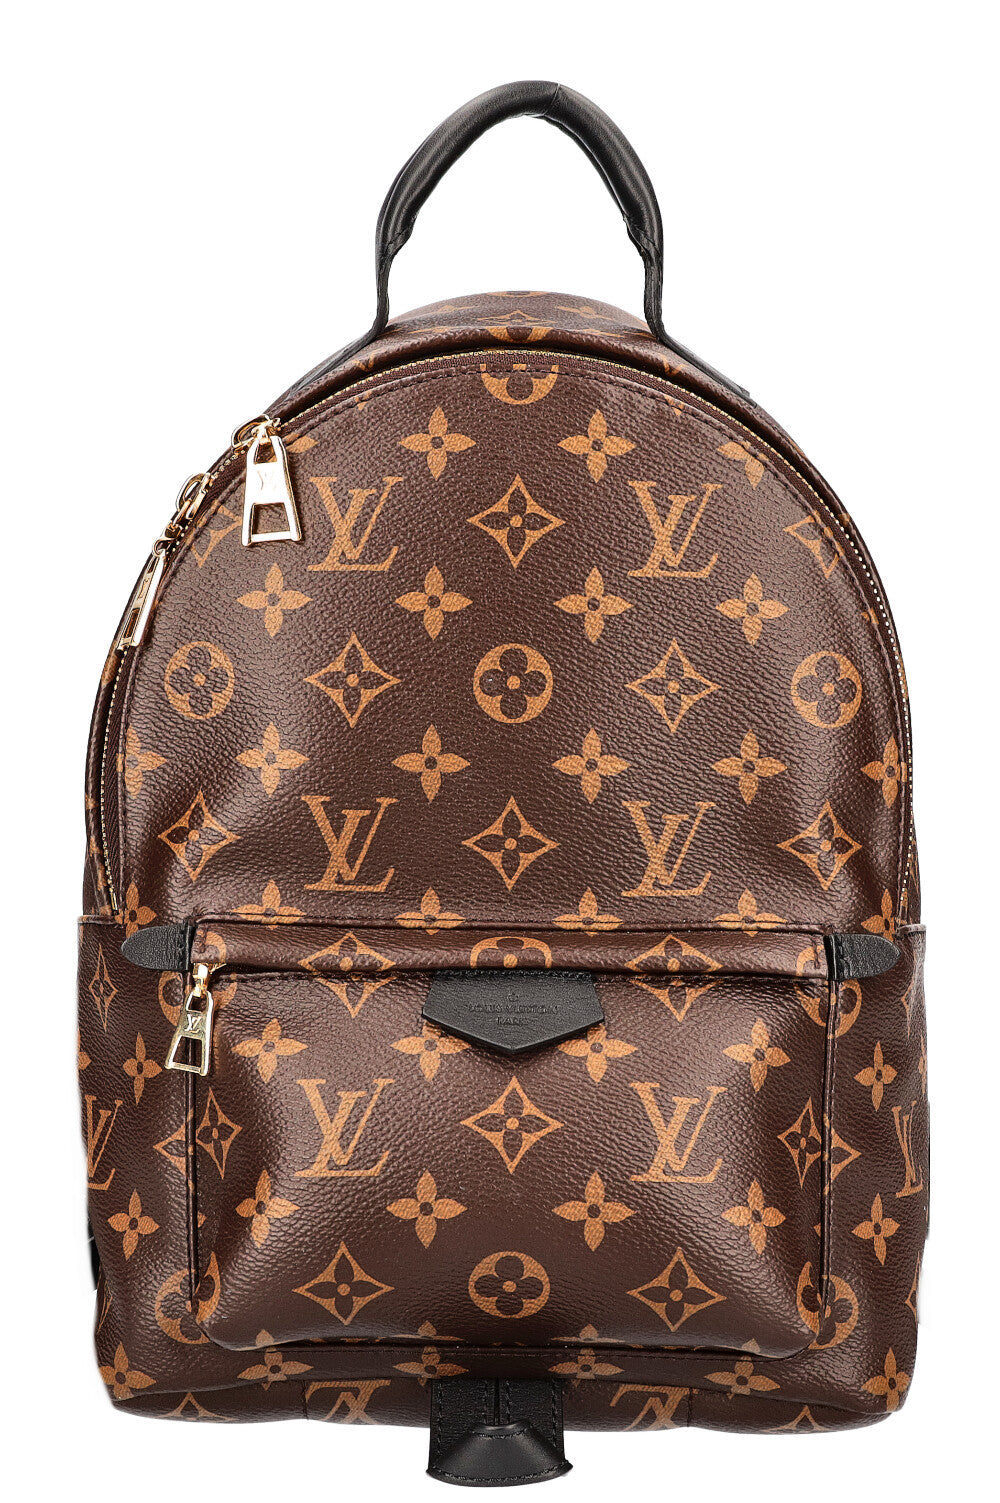 LOUIS VUITTON PALM SPRINGS MINI BACKPACK HOW TO WEAR IT DETAILS  REVIEW   YouTube